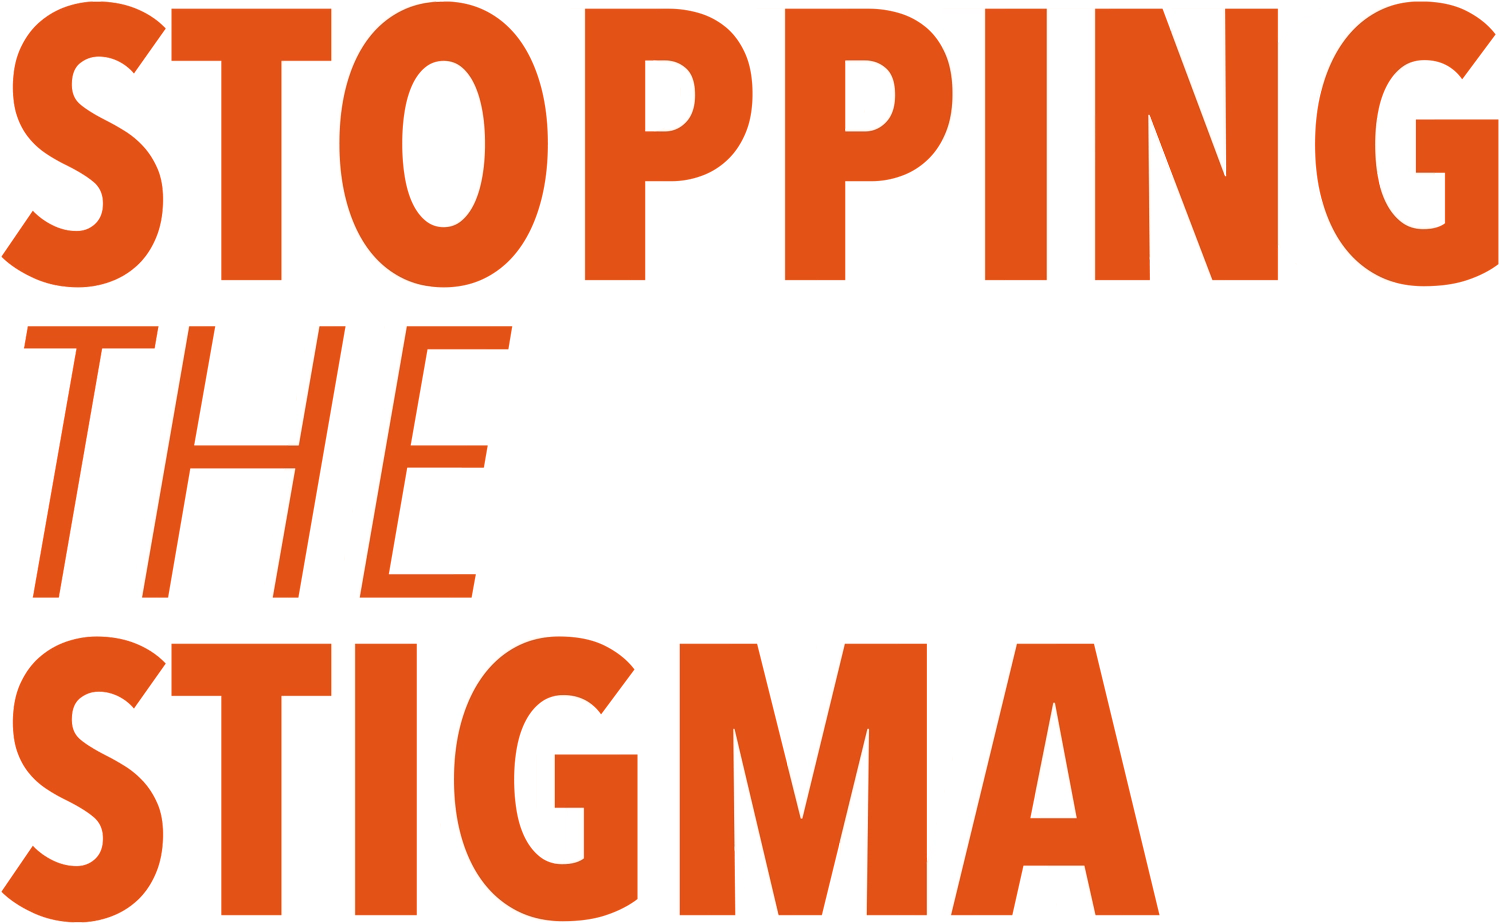 Stopping the stigma typography